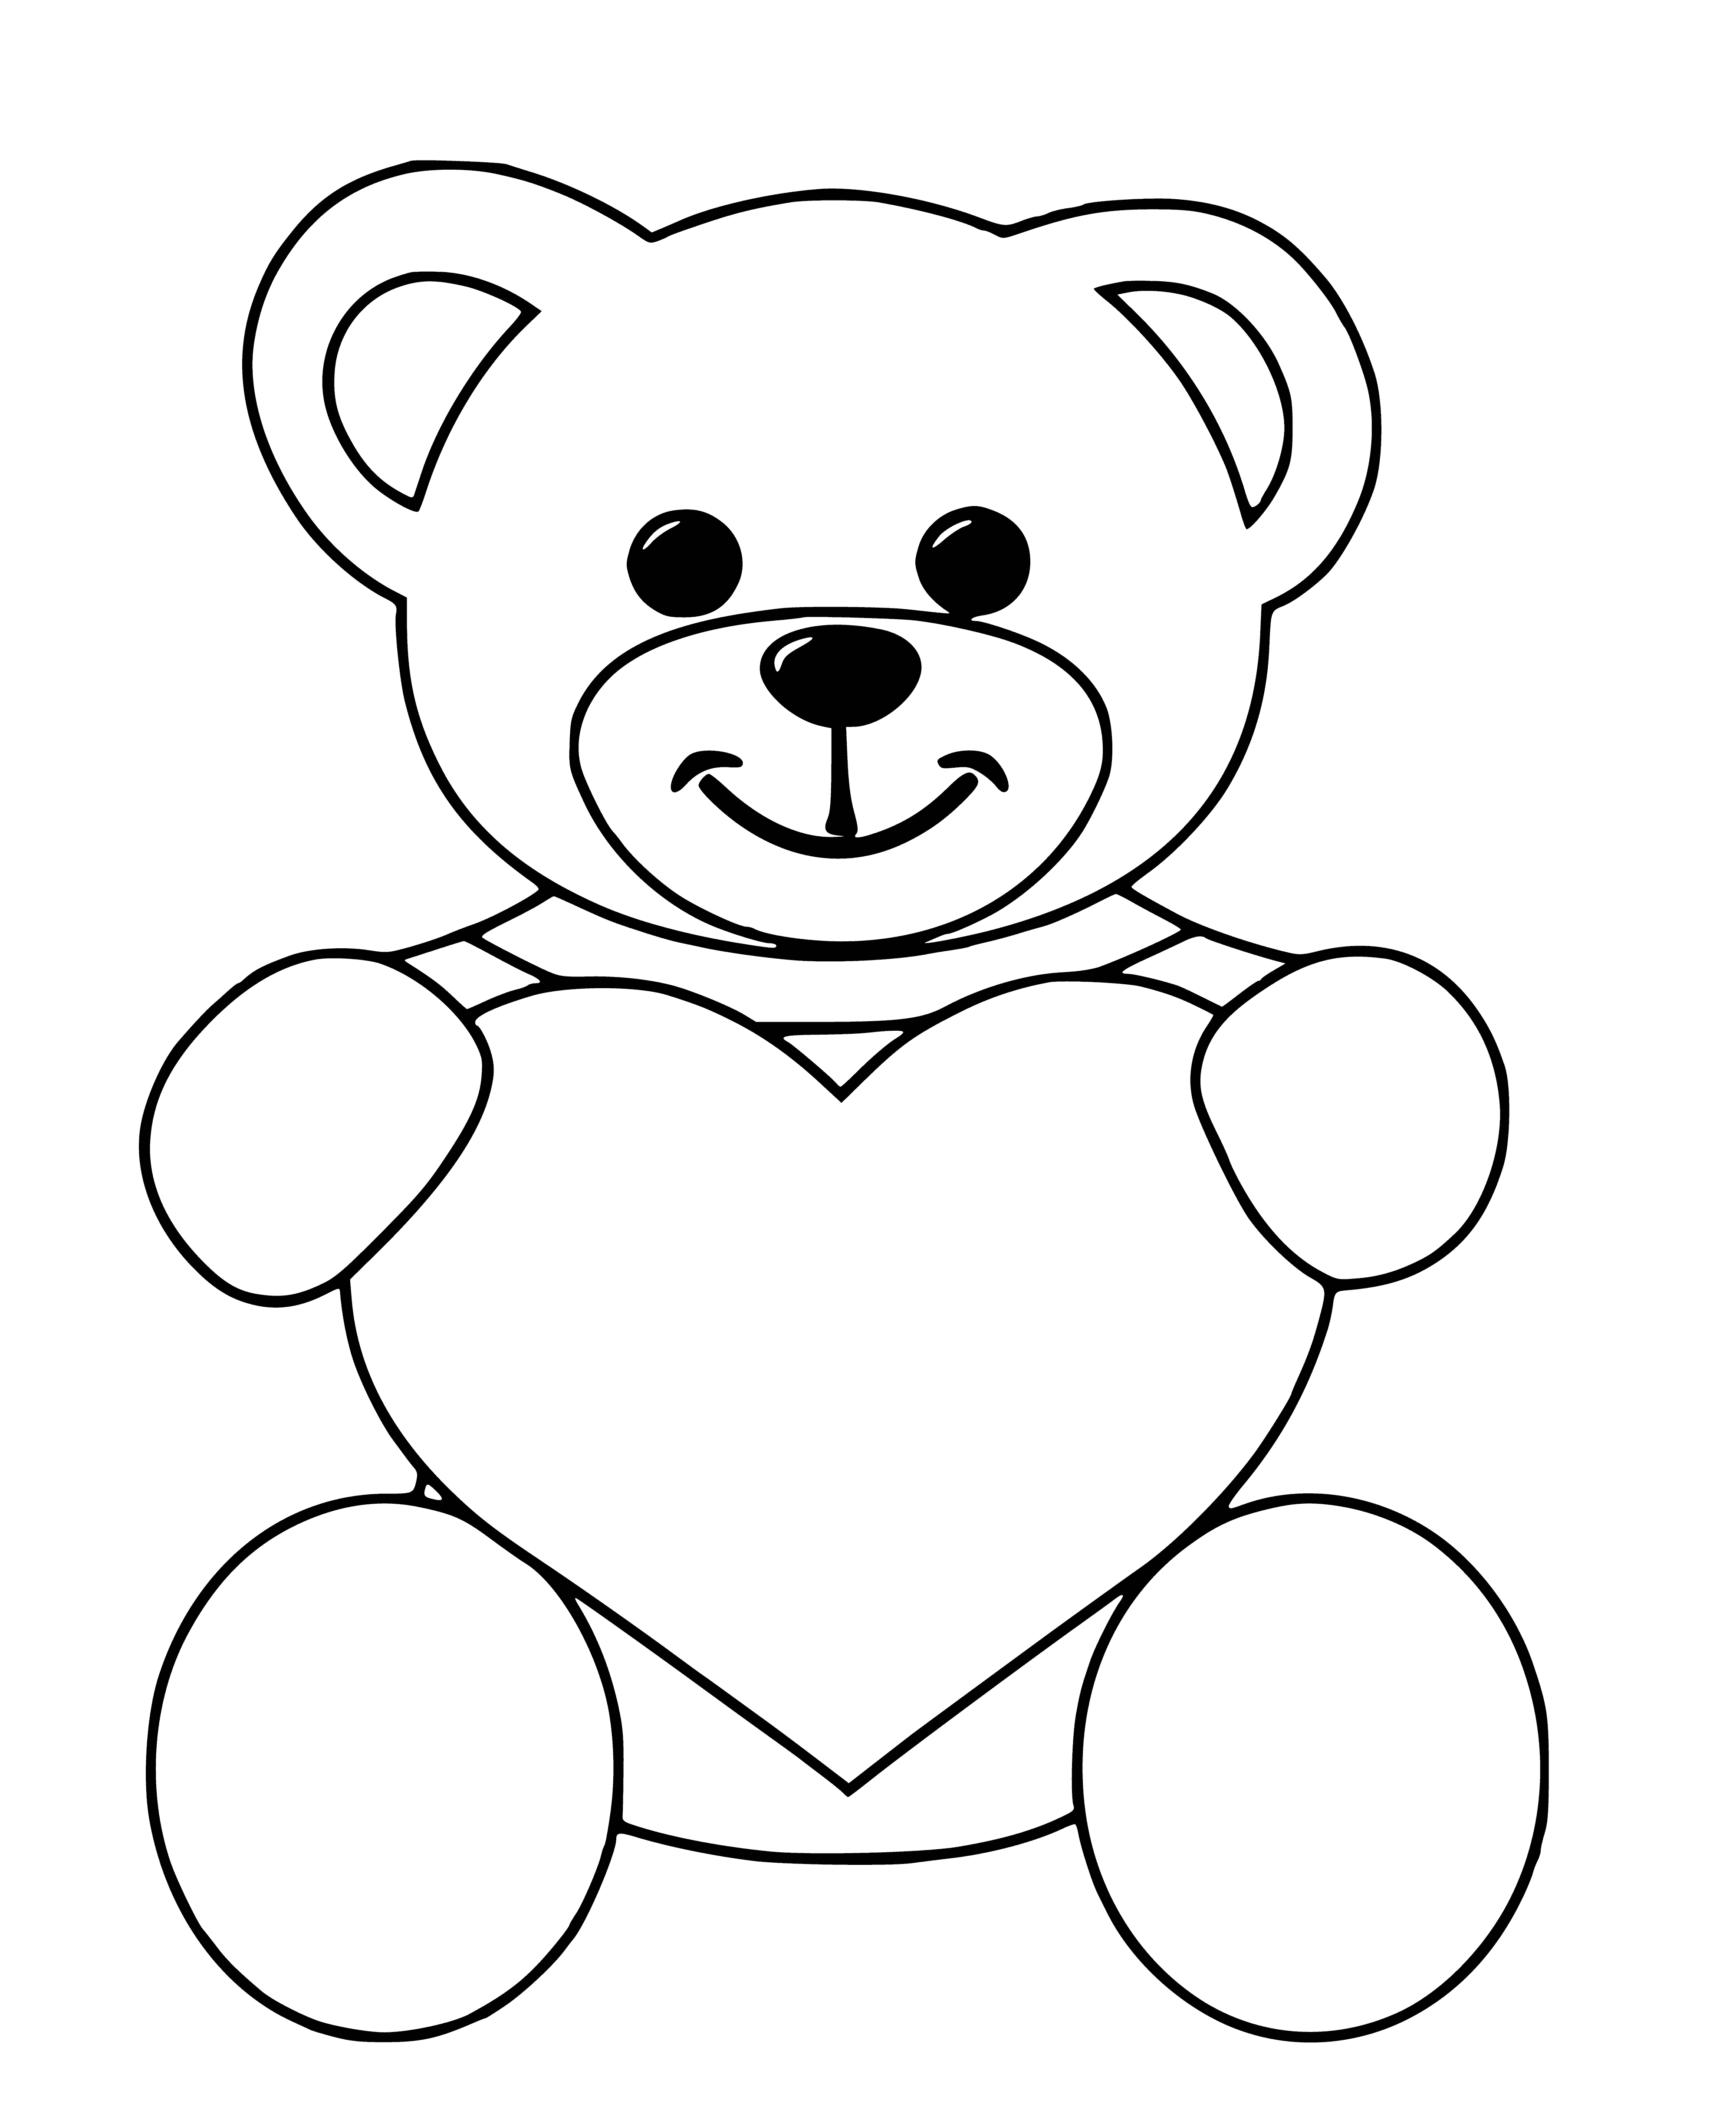 Teddy bear with valentine coloring page